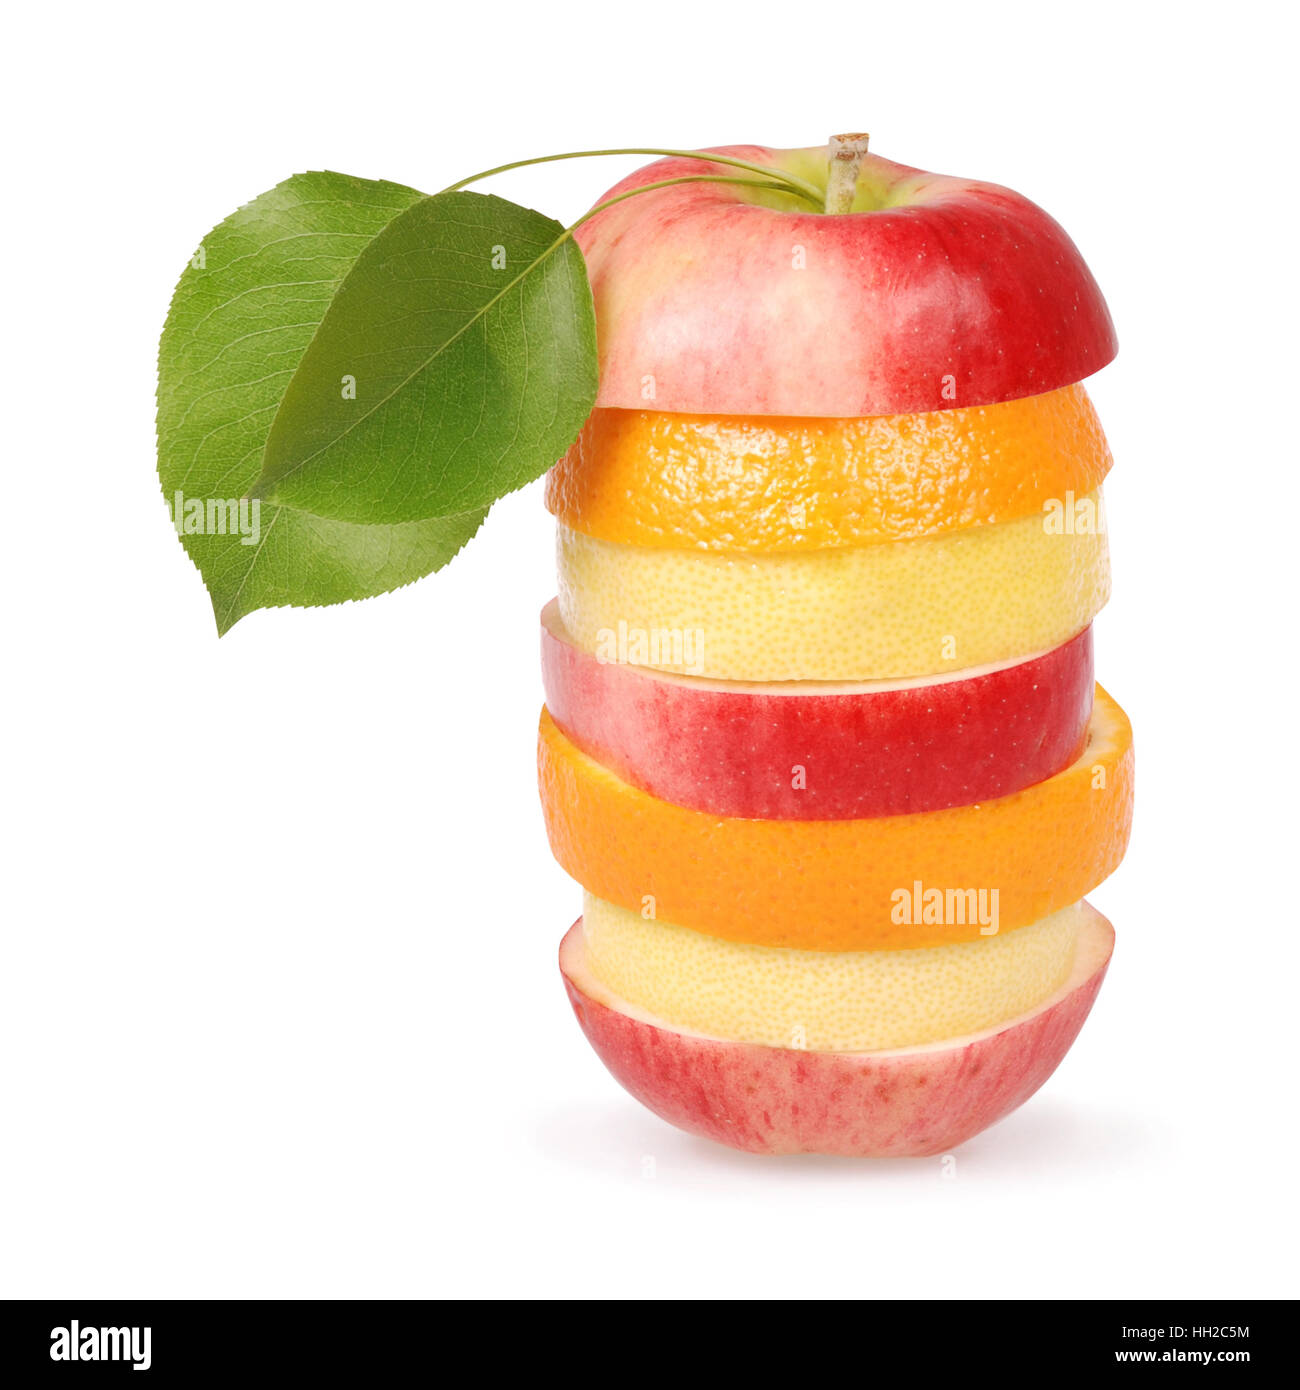 Cheerful mixed fruits with leaves including orange, pear, apple and lemon isolated on white. Clipping path included. Stock Photo